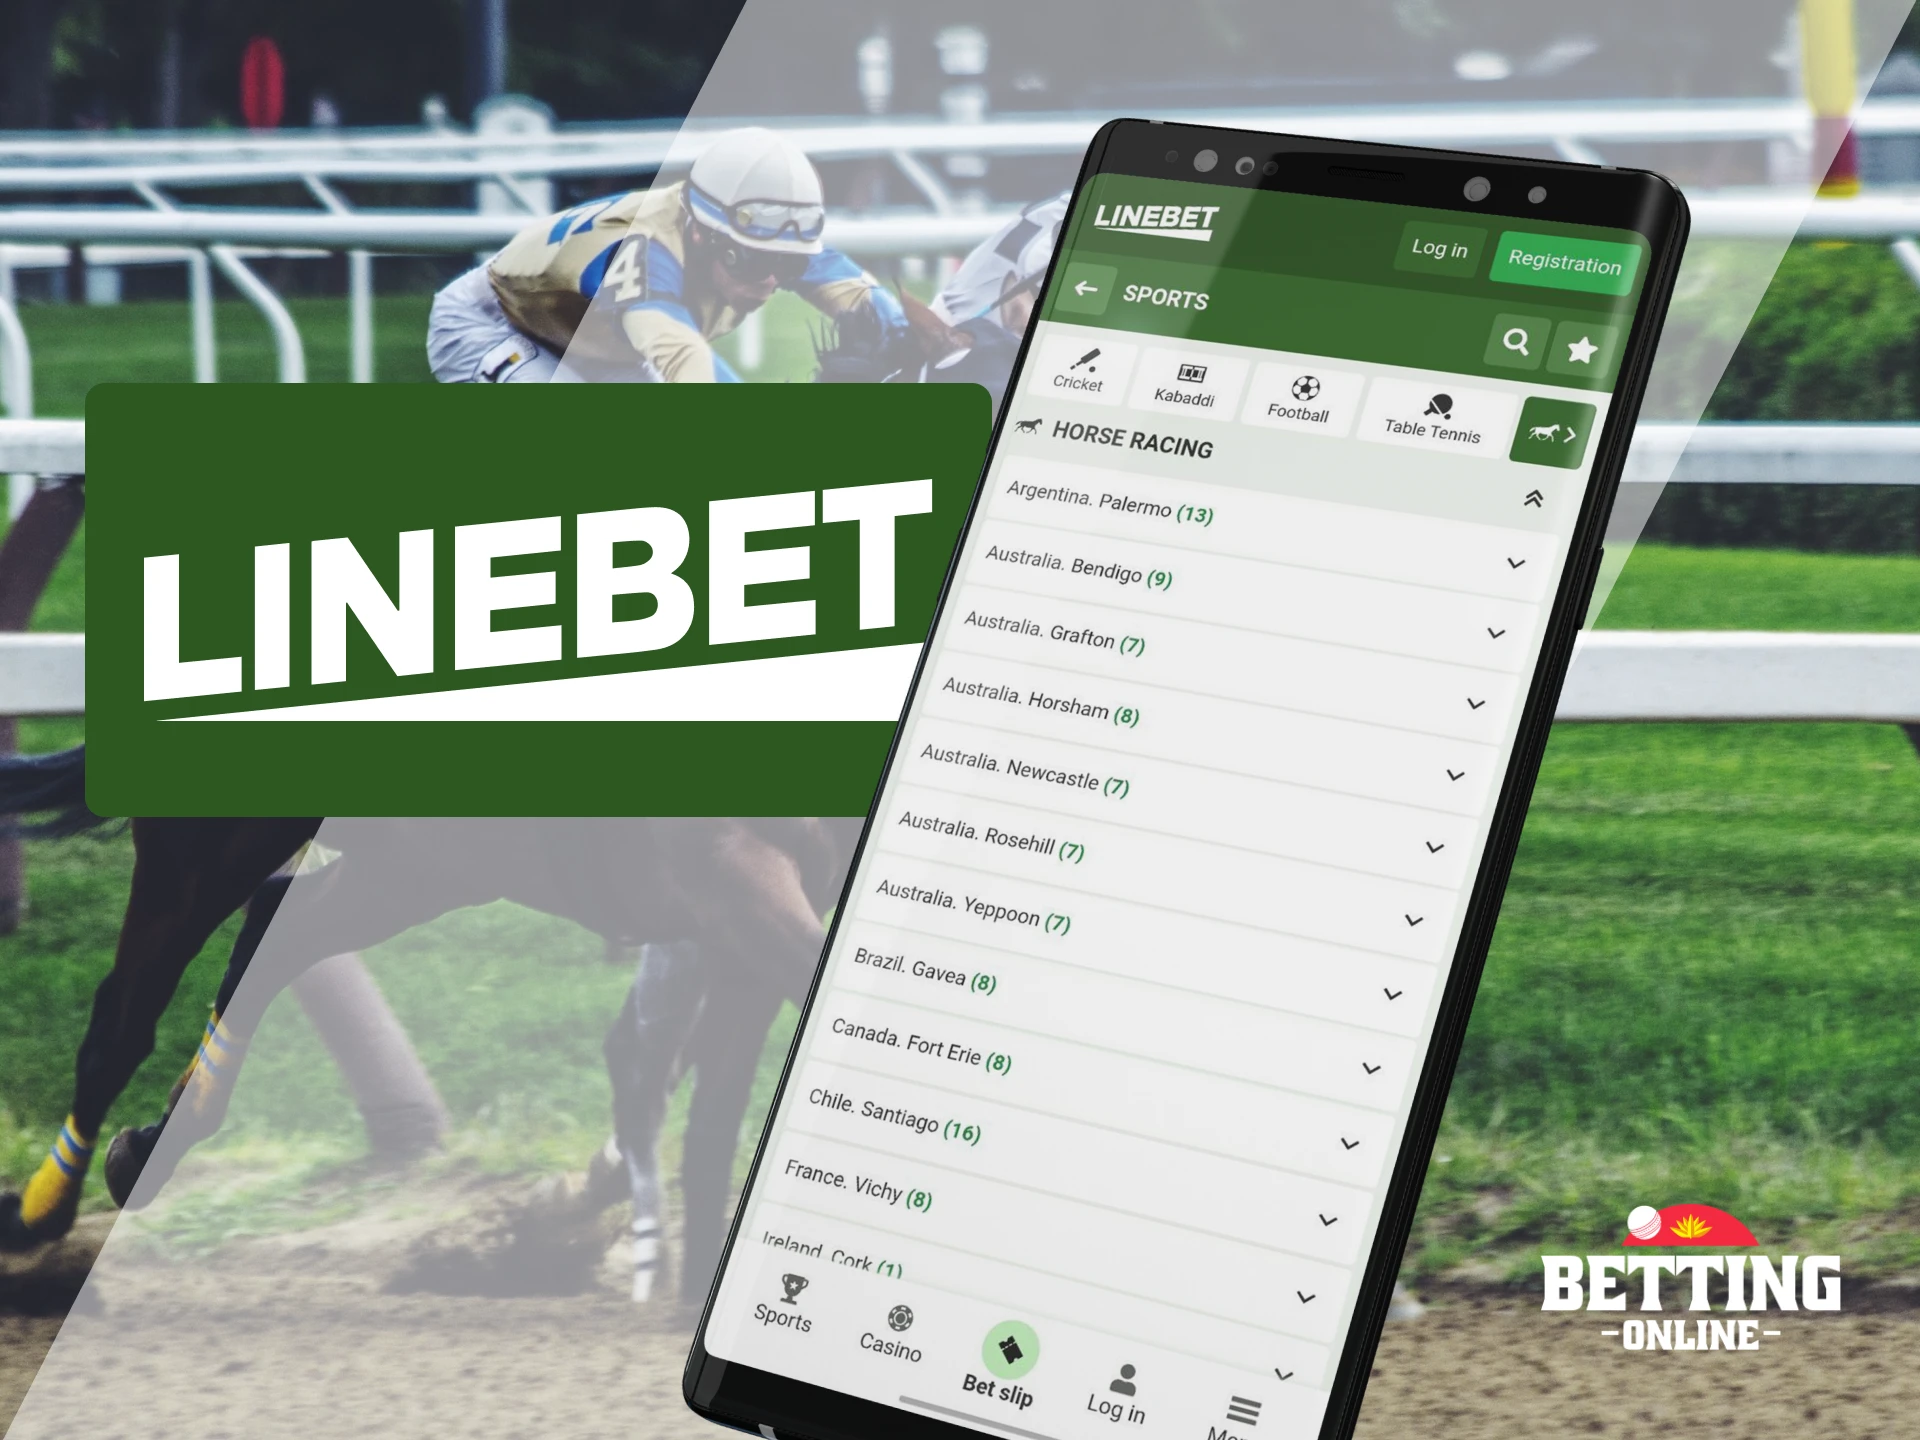 Linebet app offers betting on horse racing.